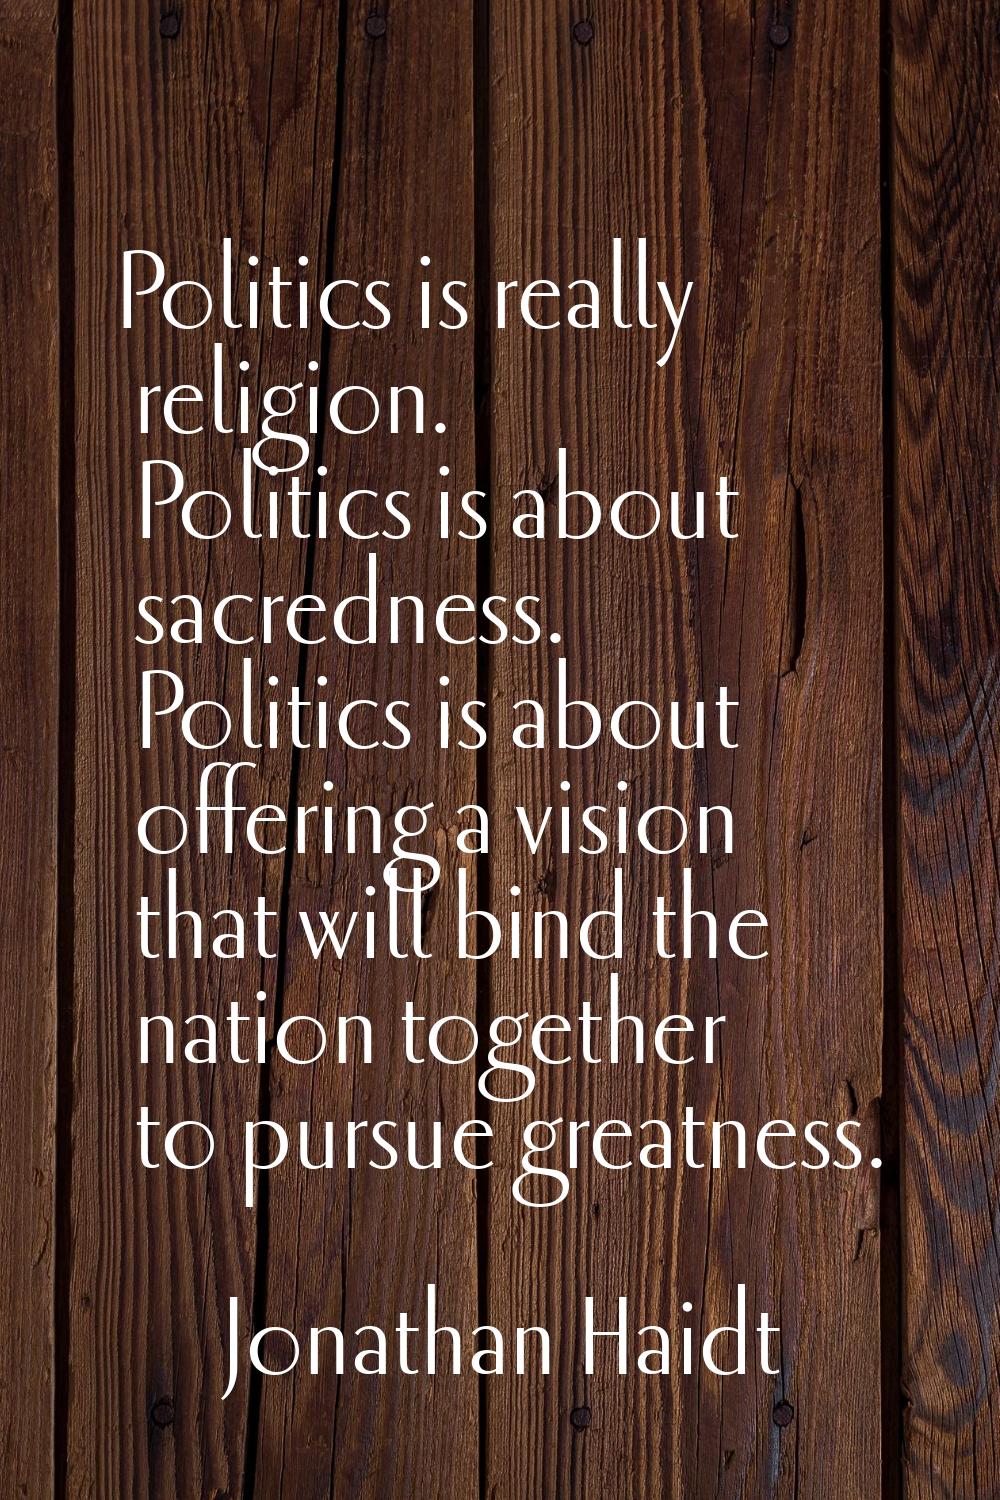 Politics is really religion. Politics is about sacredness. Politics is about offering a vision that